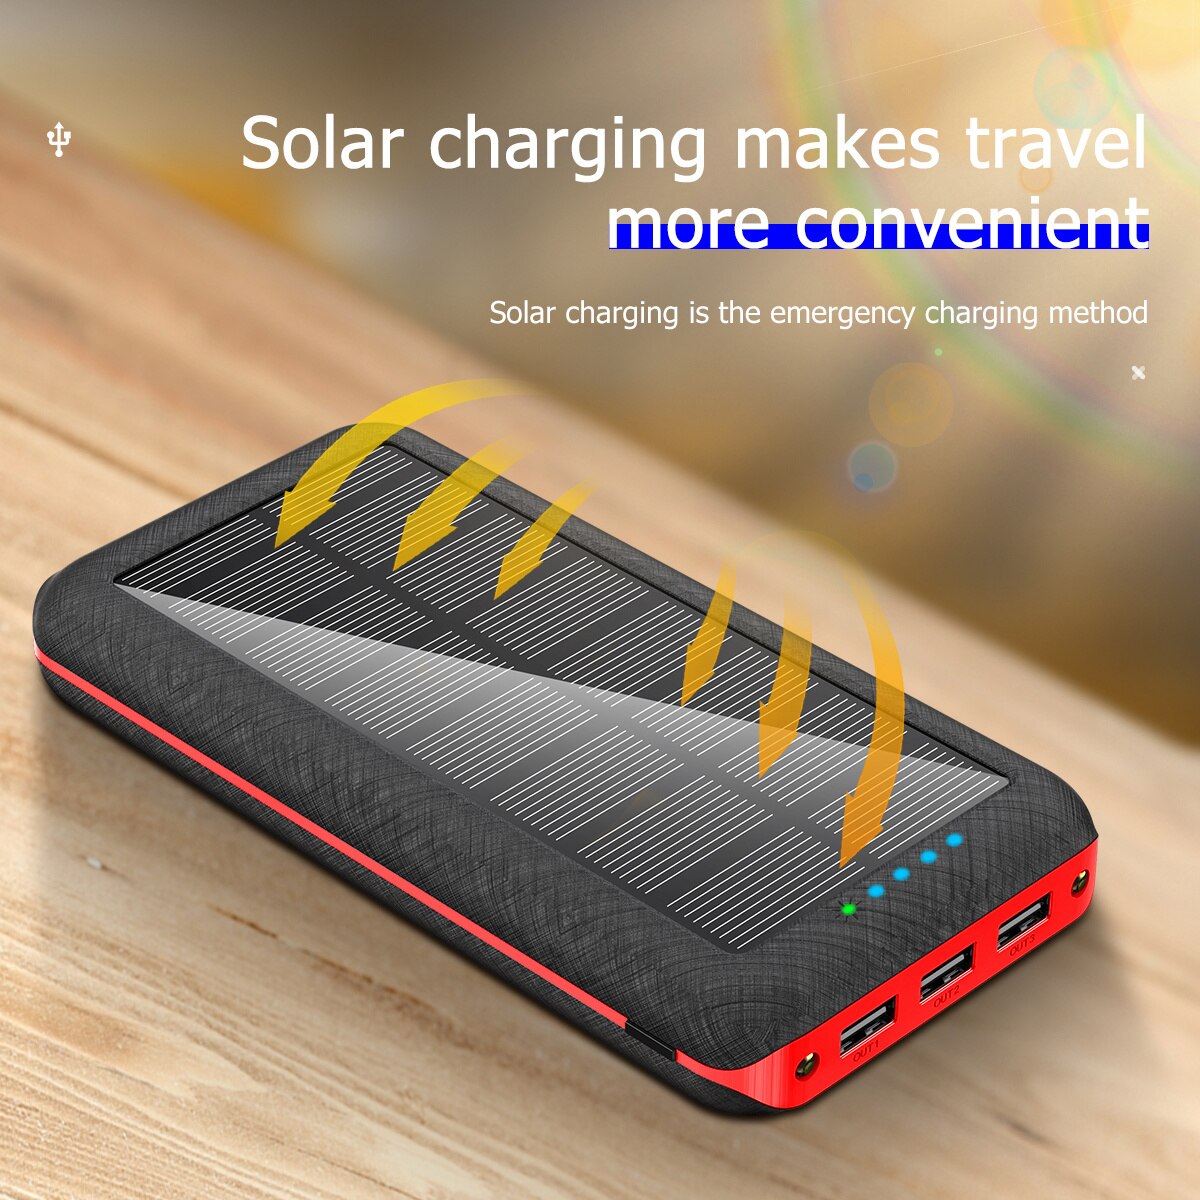 Solar Qi mobile phone fast charger, external 80000 MAH wireless battery, laptop with three external USB ports, suitable for